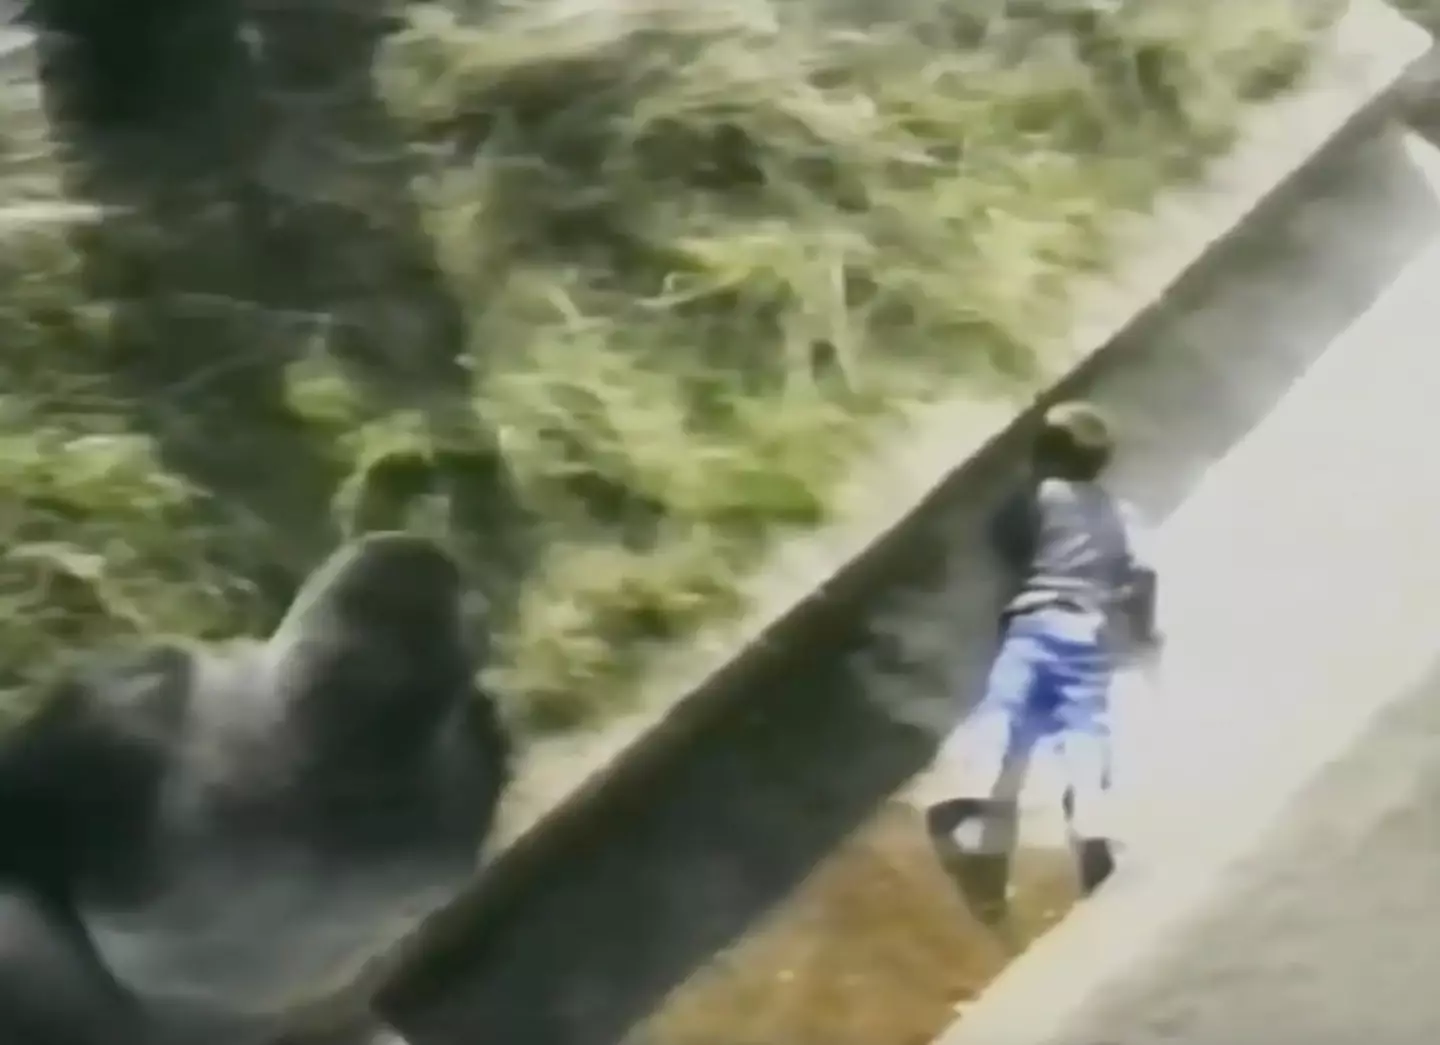 The 'Gentle Giant' protected the boy until others came in to save him.